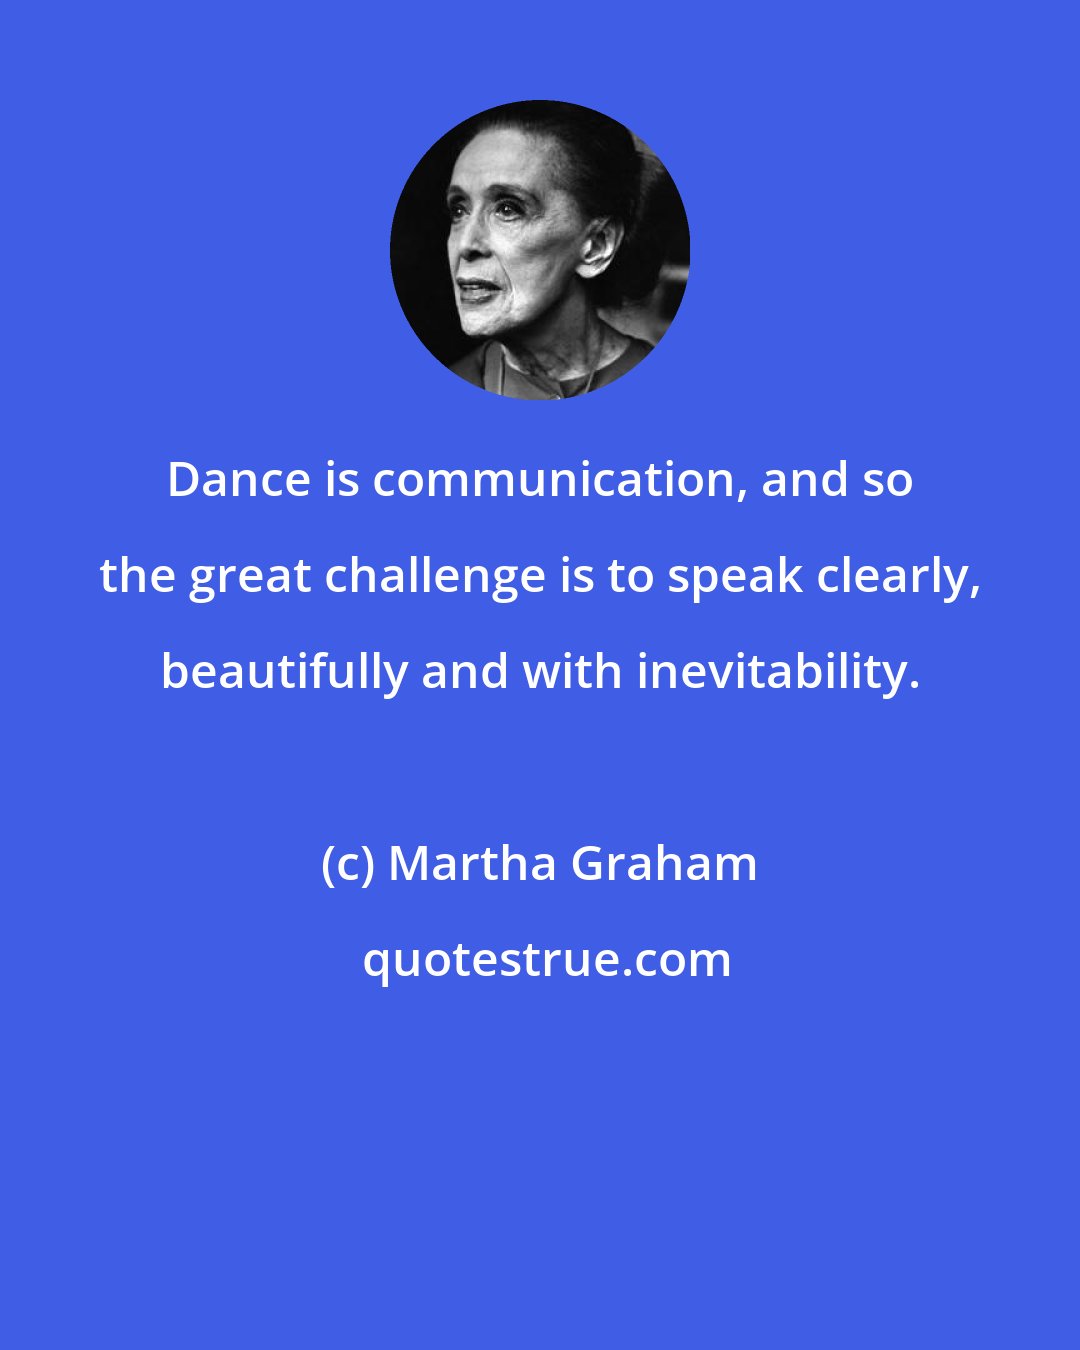 Martha Graham: Dance is communication, and so the great challenge is to speak clearly, beautifully and with inevitability.